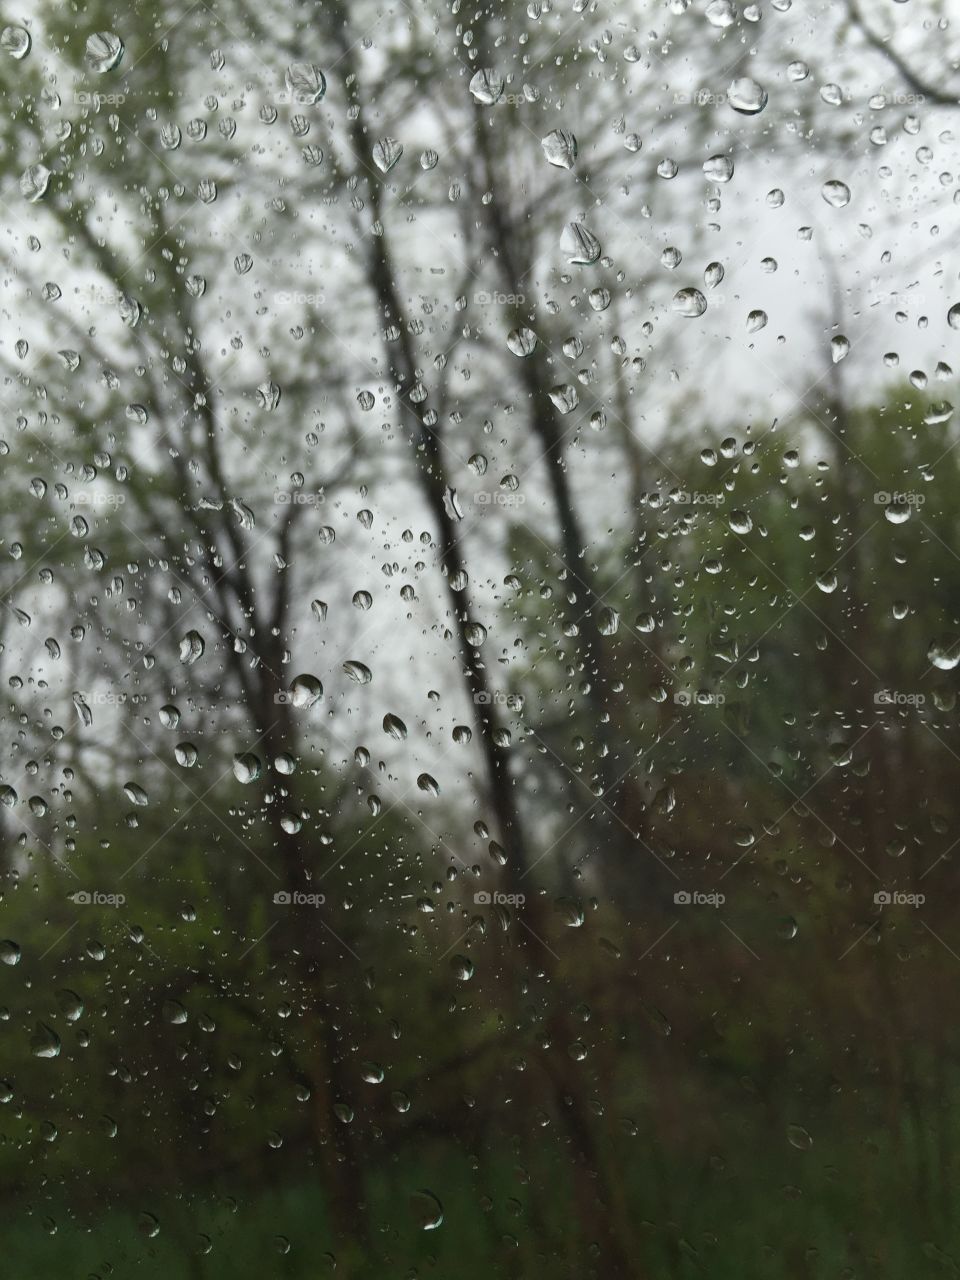 A day in Michigan with rain glistening upon a window  